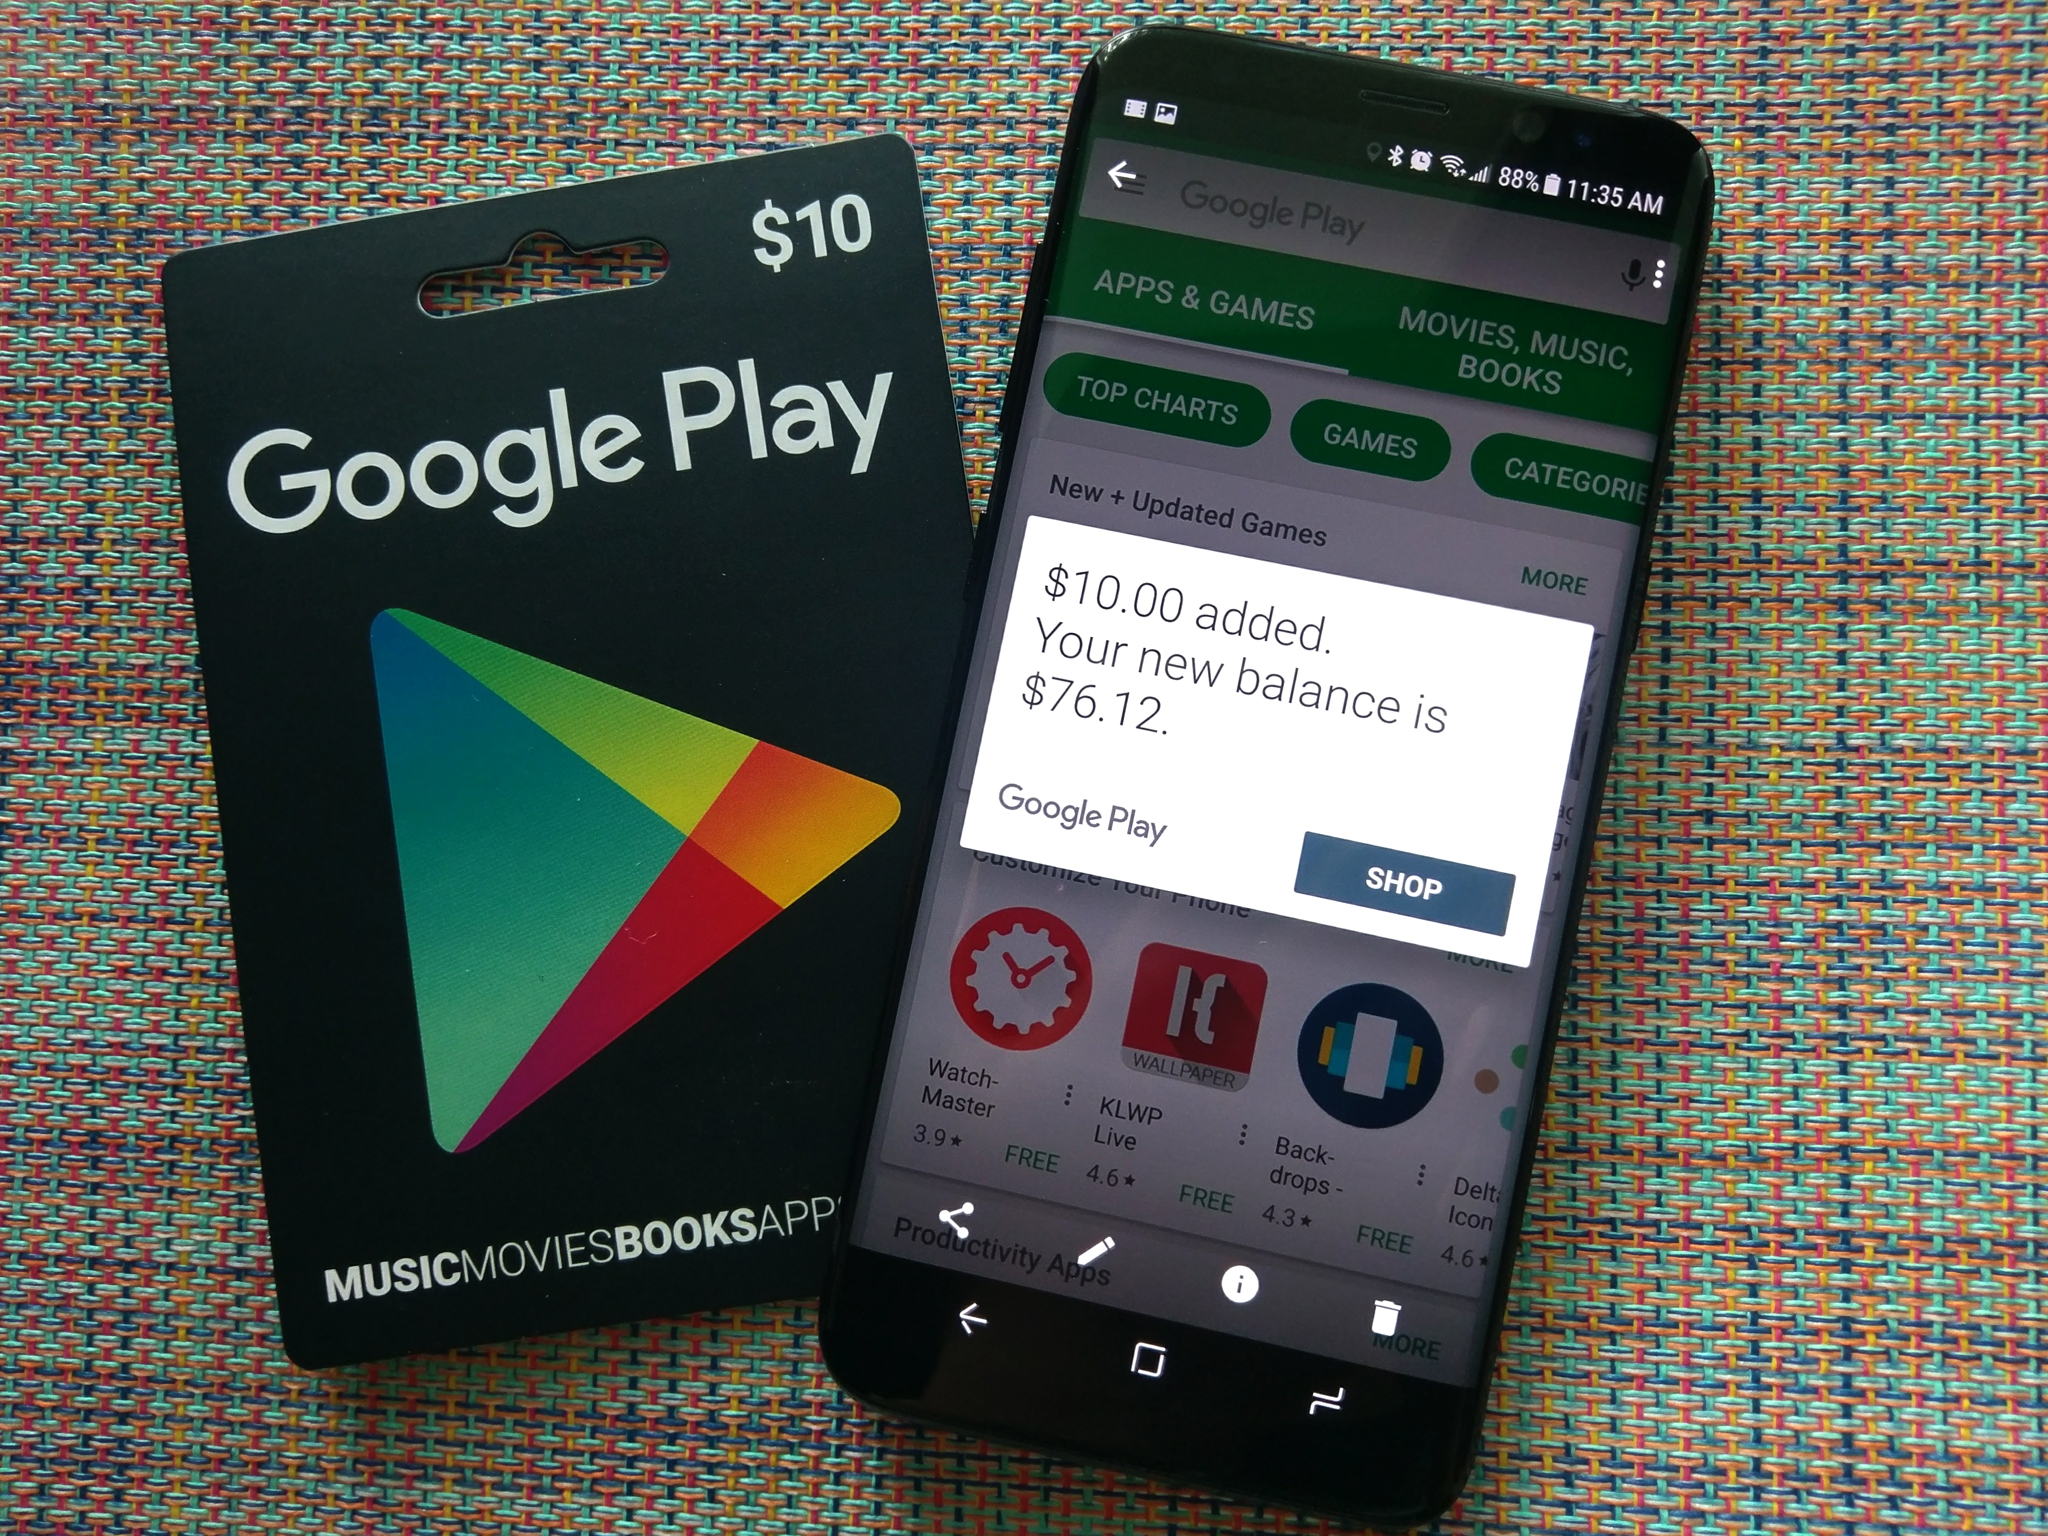 How to use a Google Play gift card Android Central